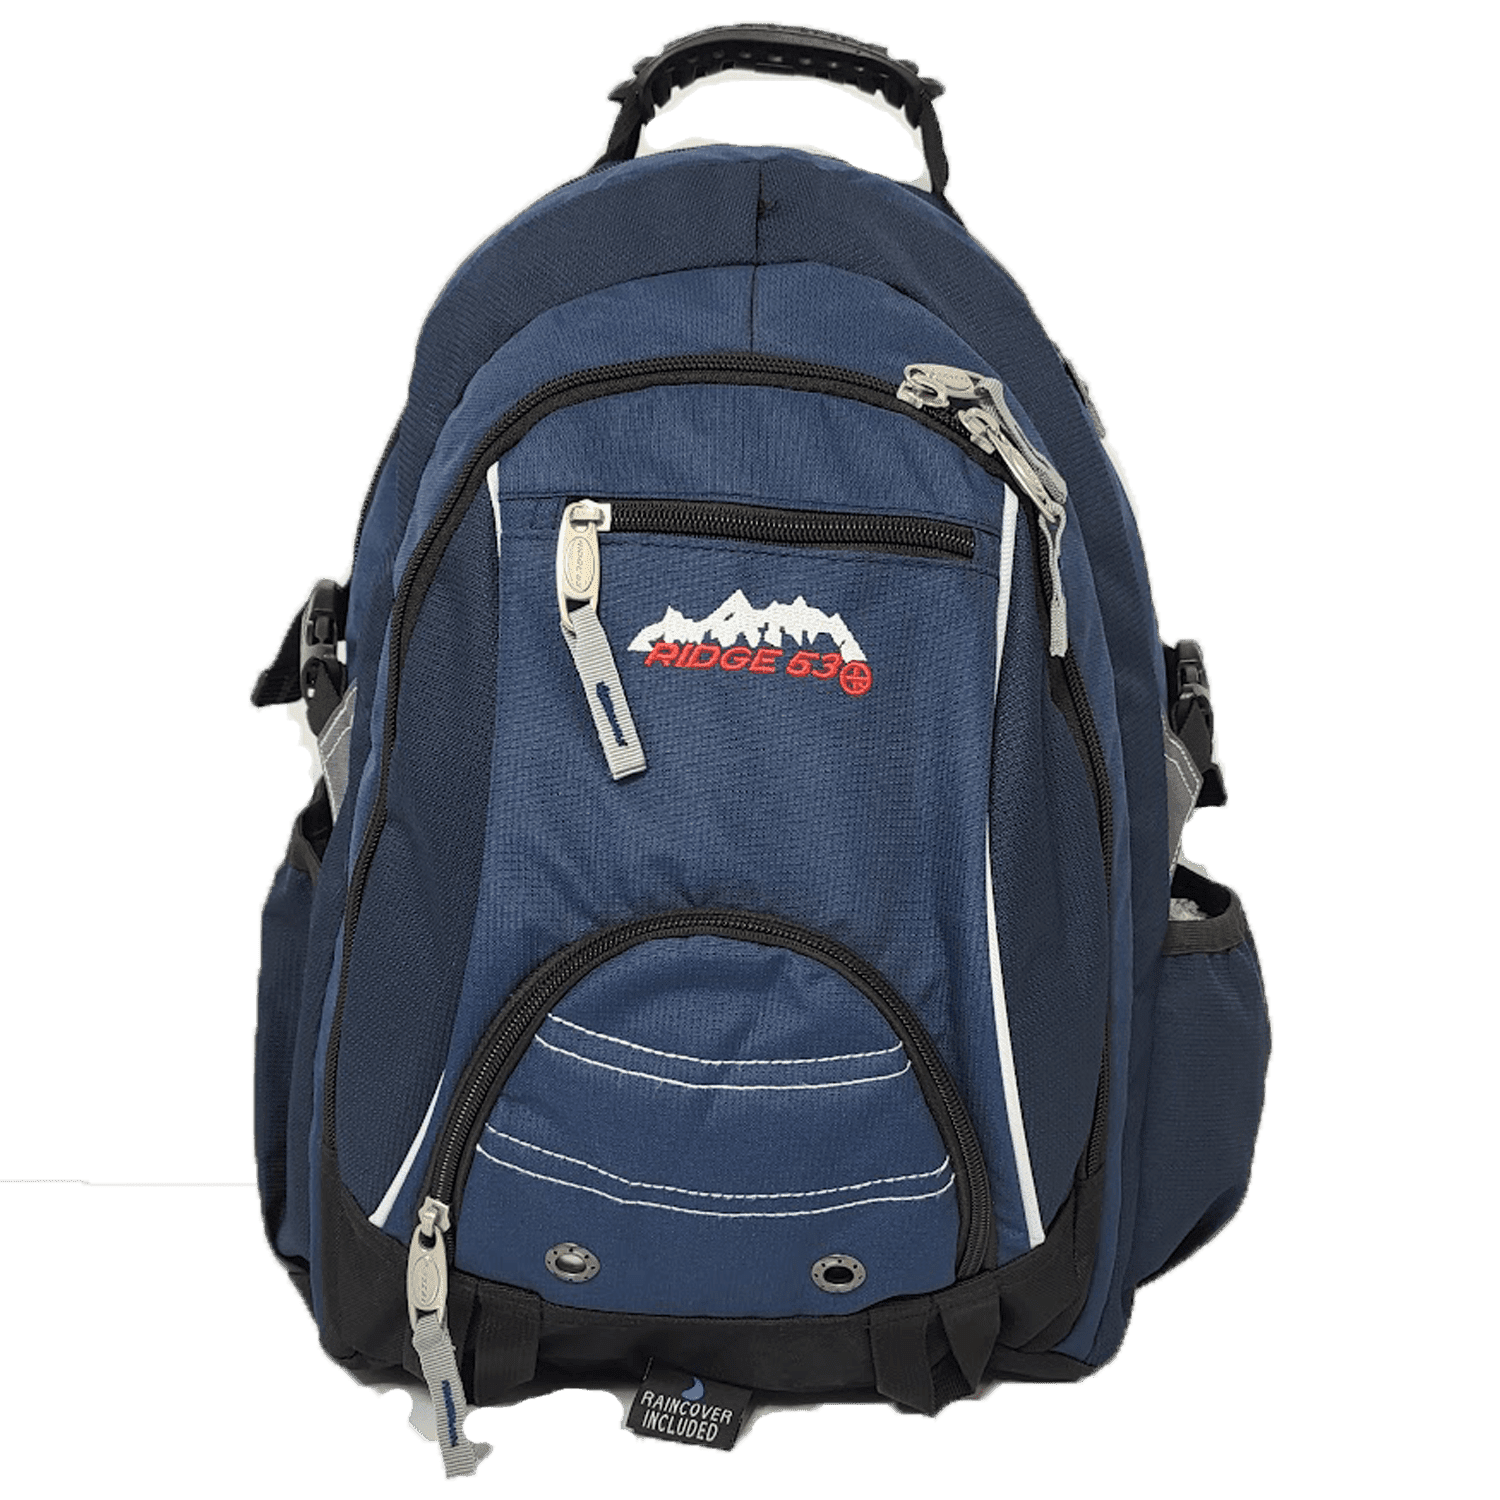 Sportech Ridge 53 – Bolton Backpack - Navy 1 Shaws Department Stores